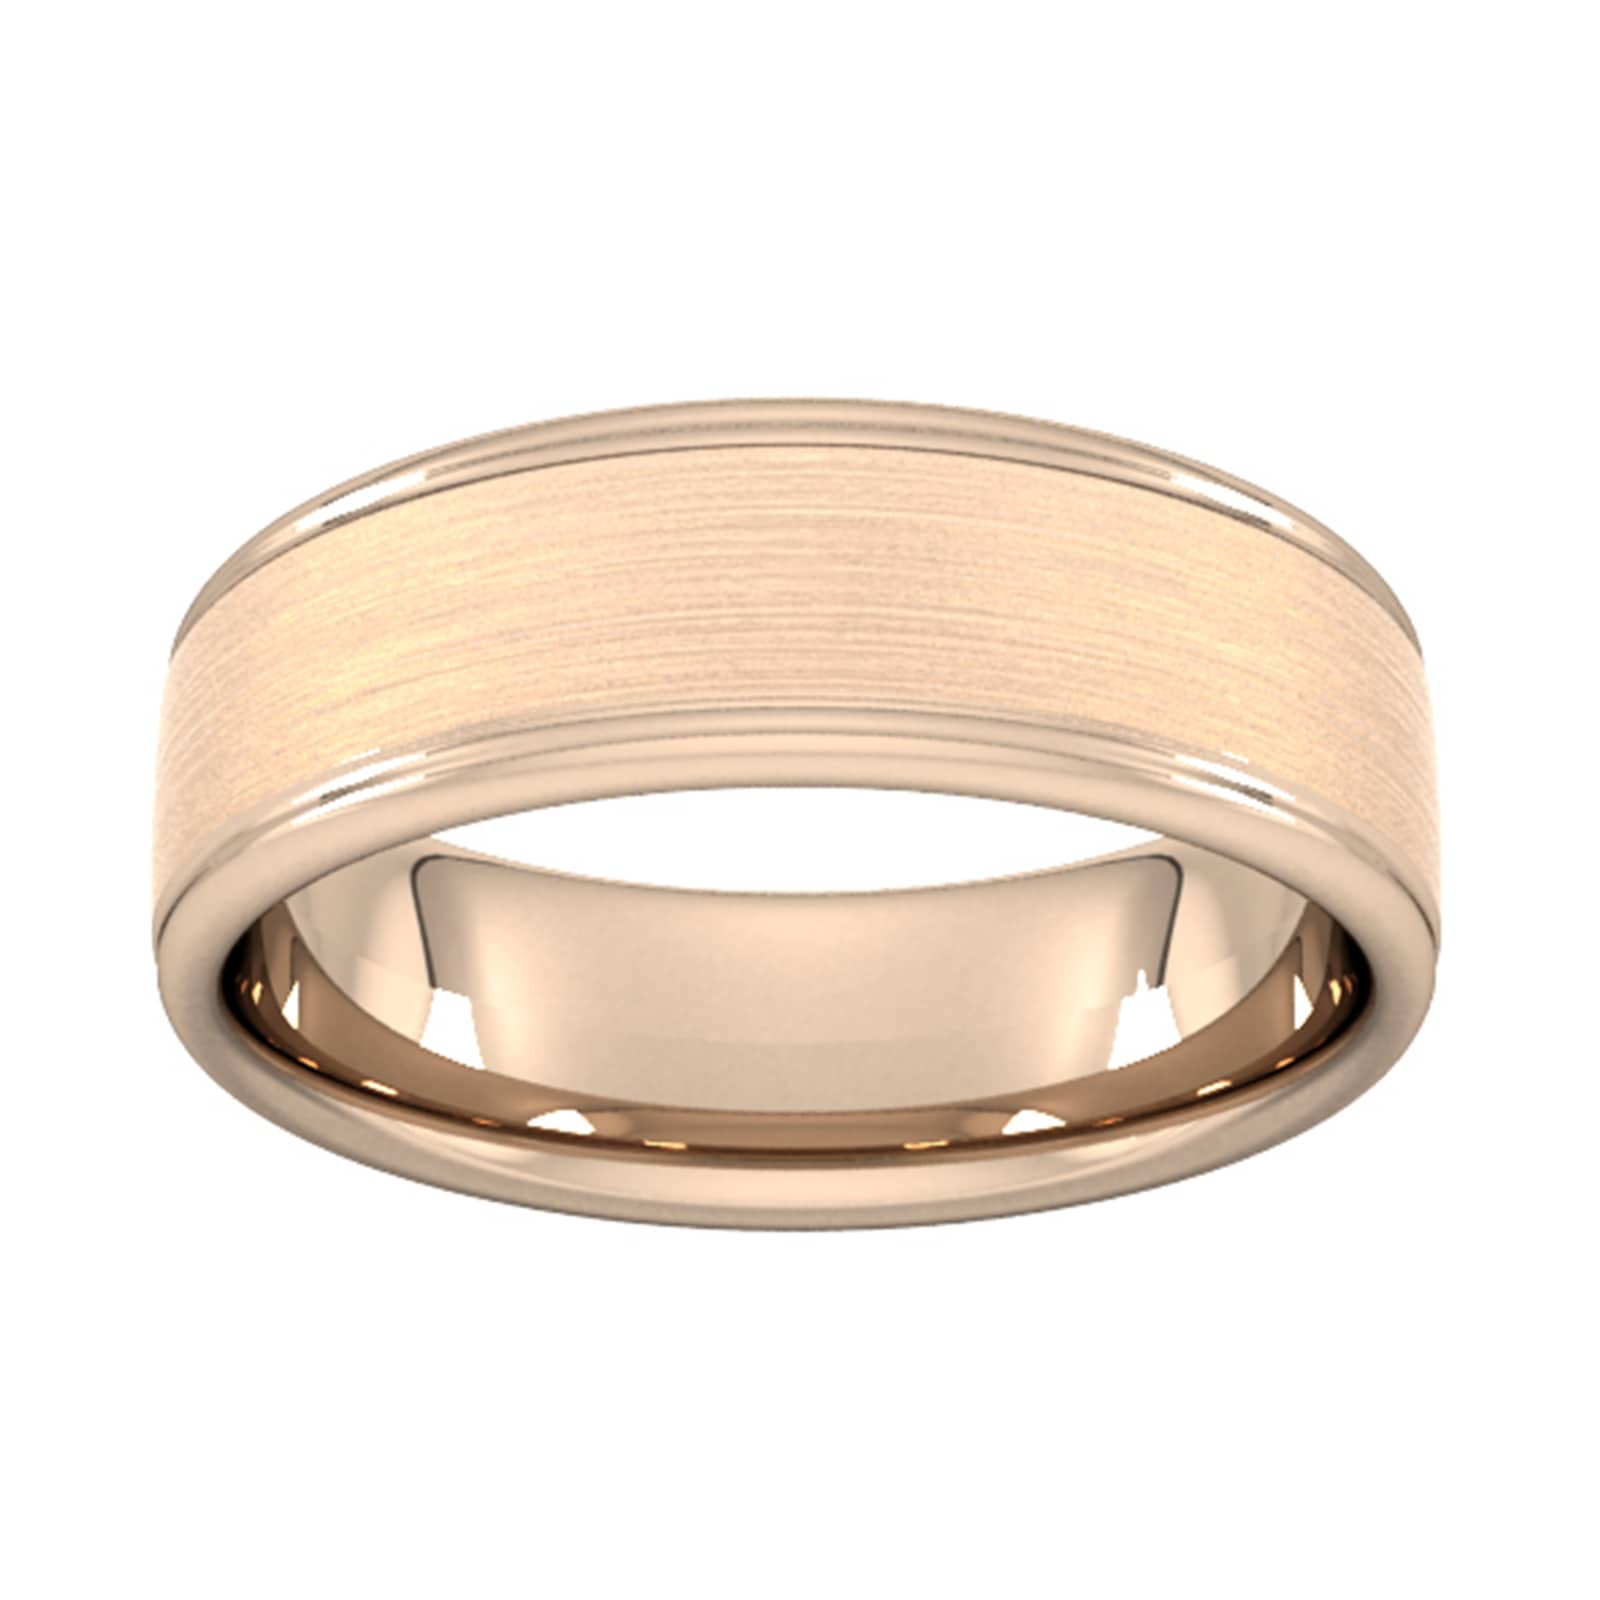 7mm Slight Court Heavy Matt Centre With Grooves Wedding Ring In 18 Carat Rose Gold - Ring Size R